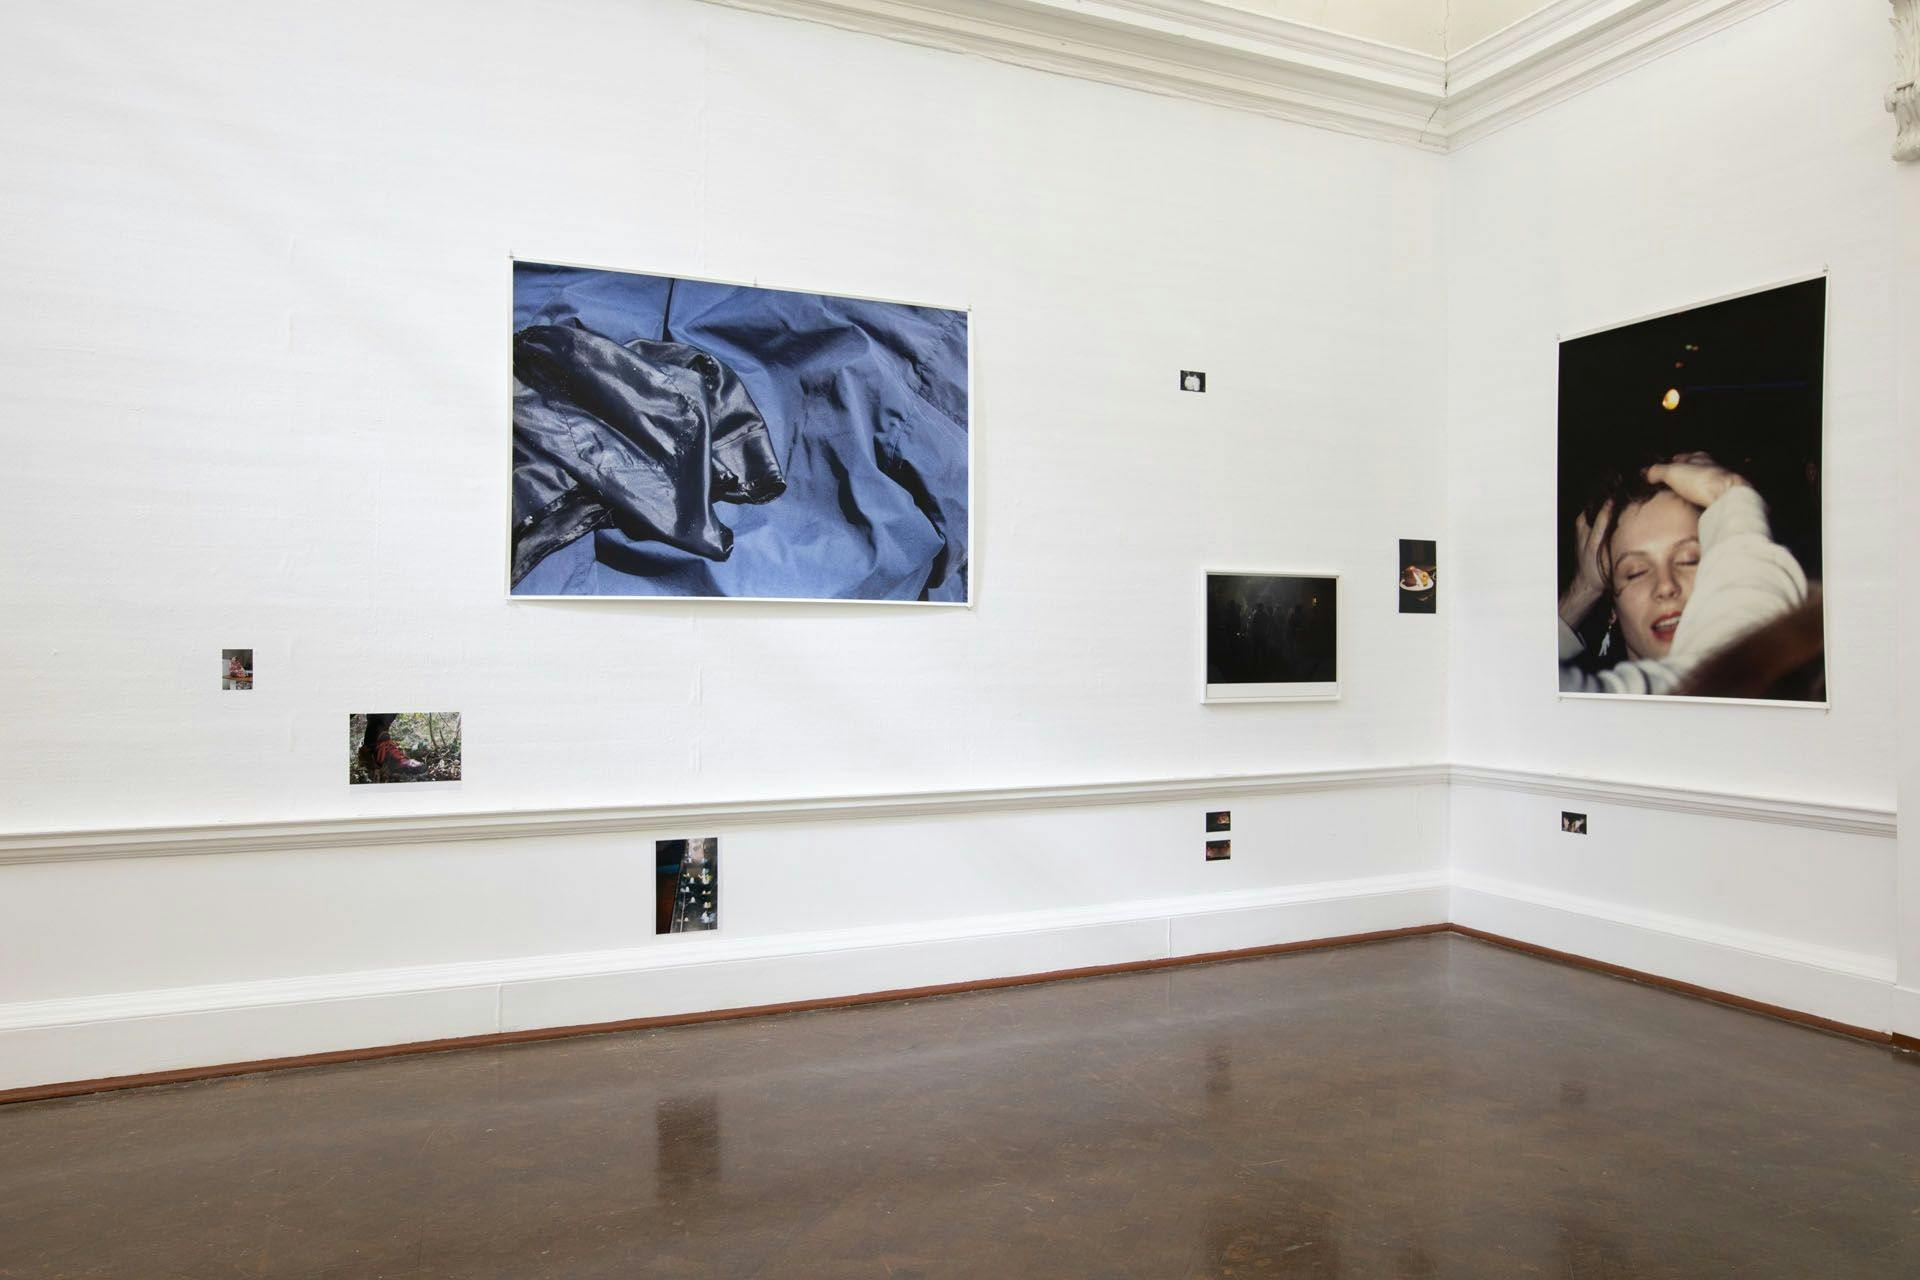 Installation view of the exhibition Wolfgang Tillmans: Fragile at Johannesburg Art Gallery, dated 2018.